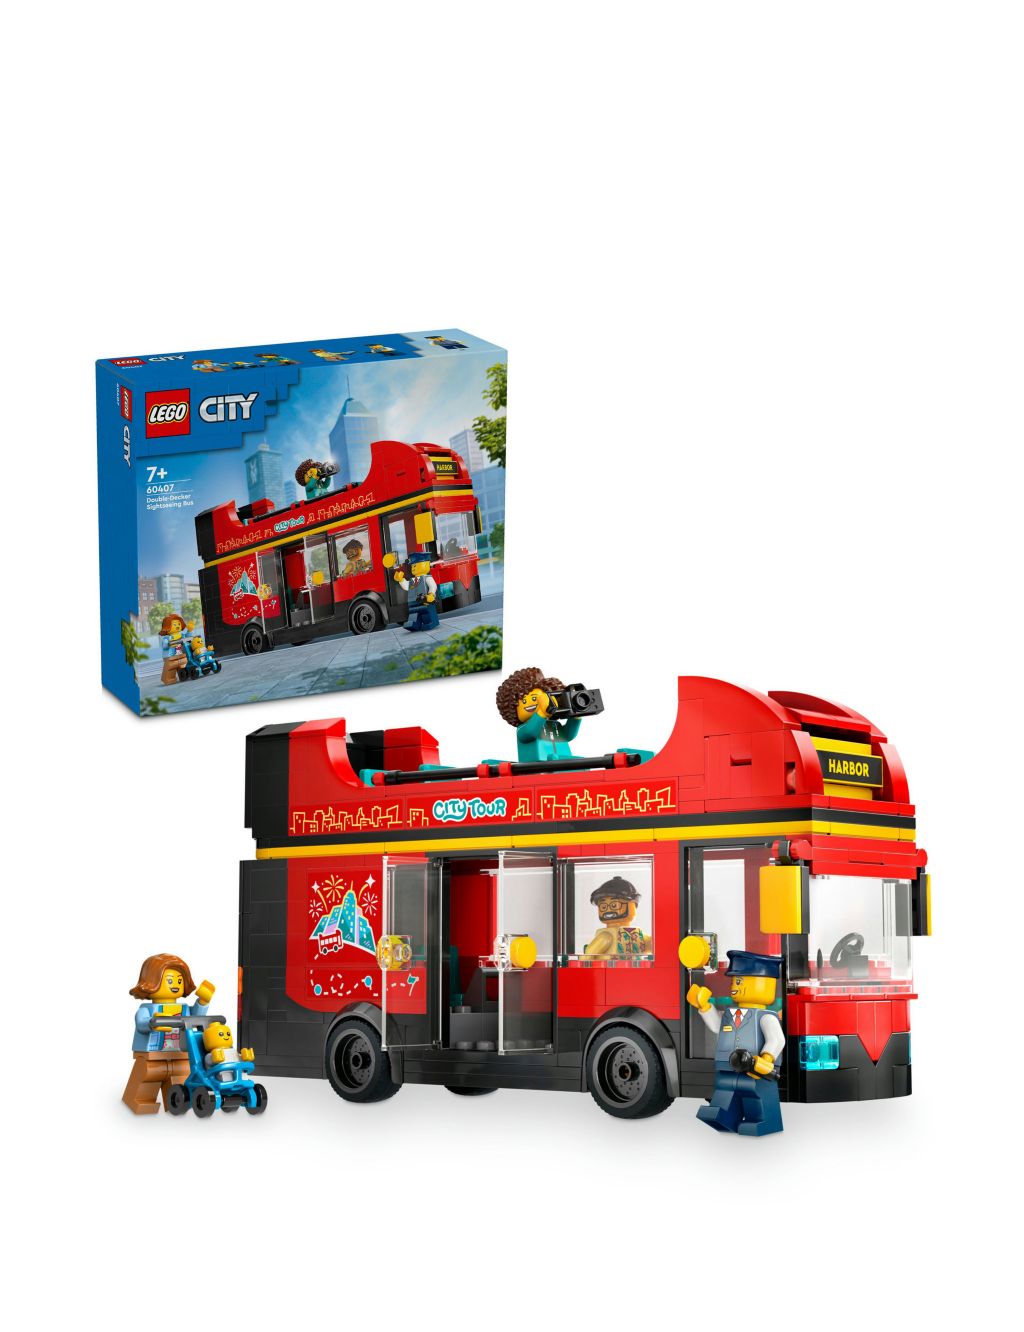 LEGO® City Red Double-Decker Sightseeing Bus Toy 60407 (7+ Yrs)